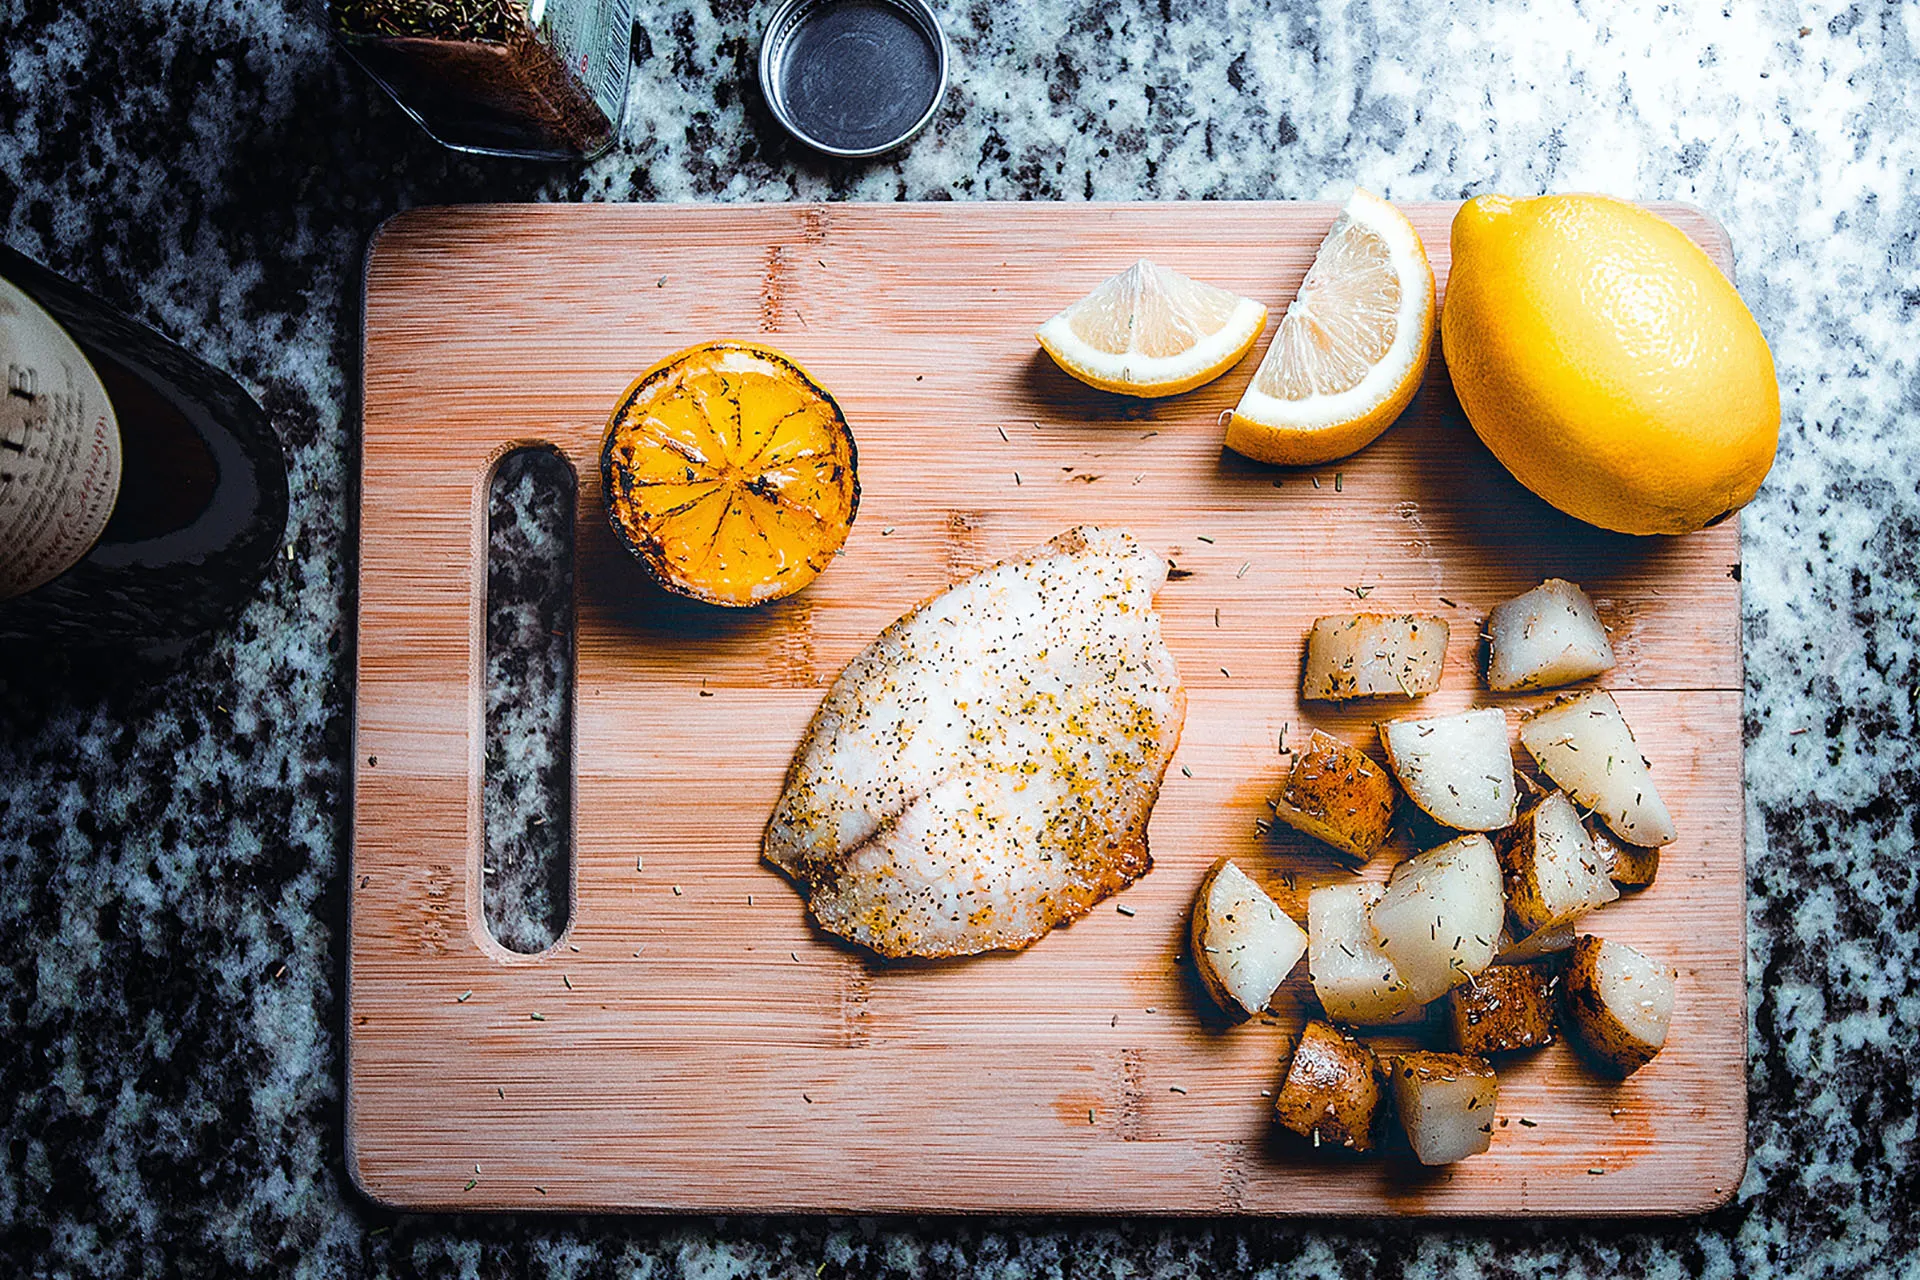 Lemon slices with fish on wooden board